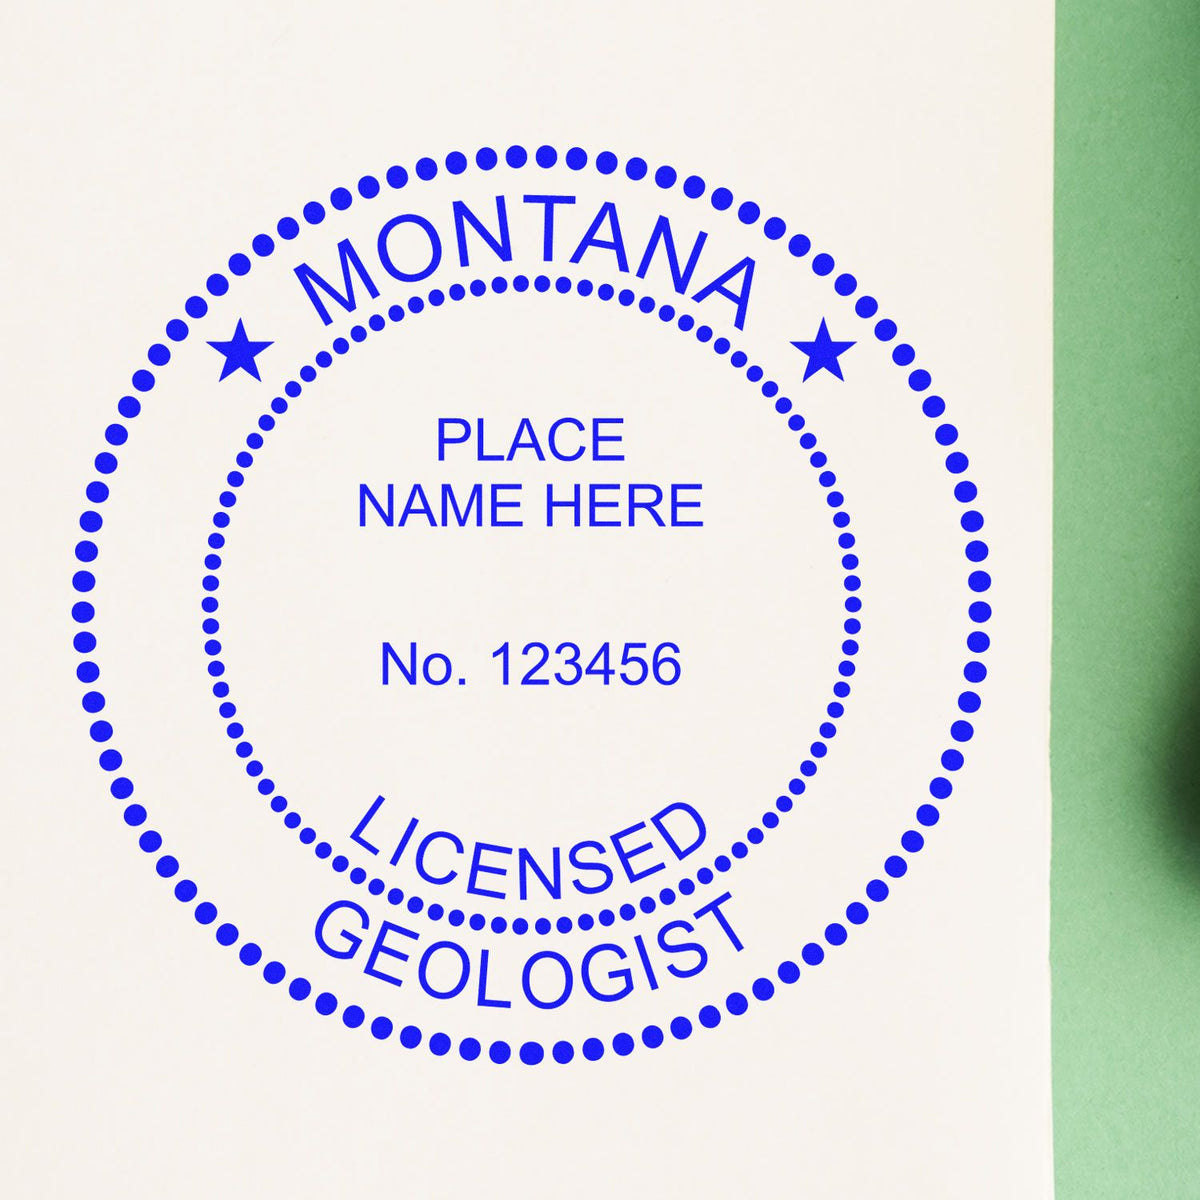 An alternative view of the Self-Inking Montana Geologist Stamp stamped on a sheet of paper showing the image in use